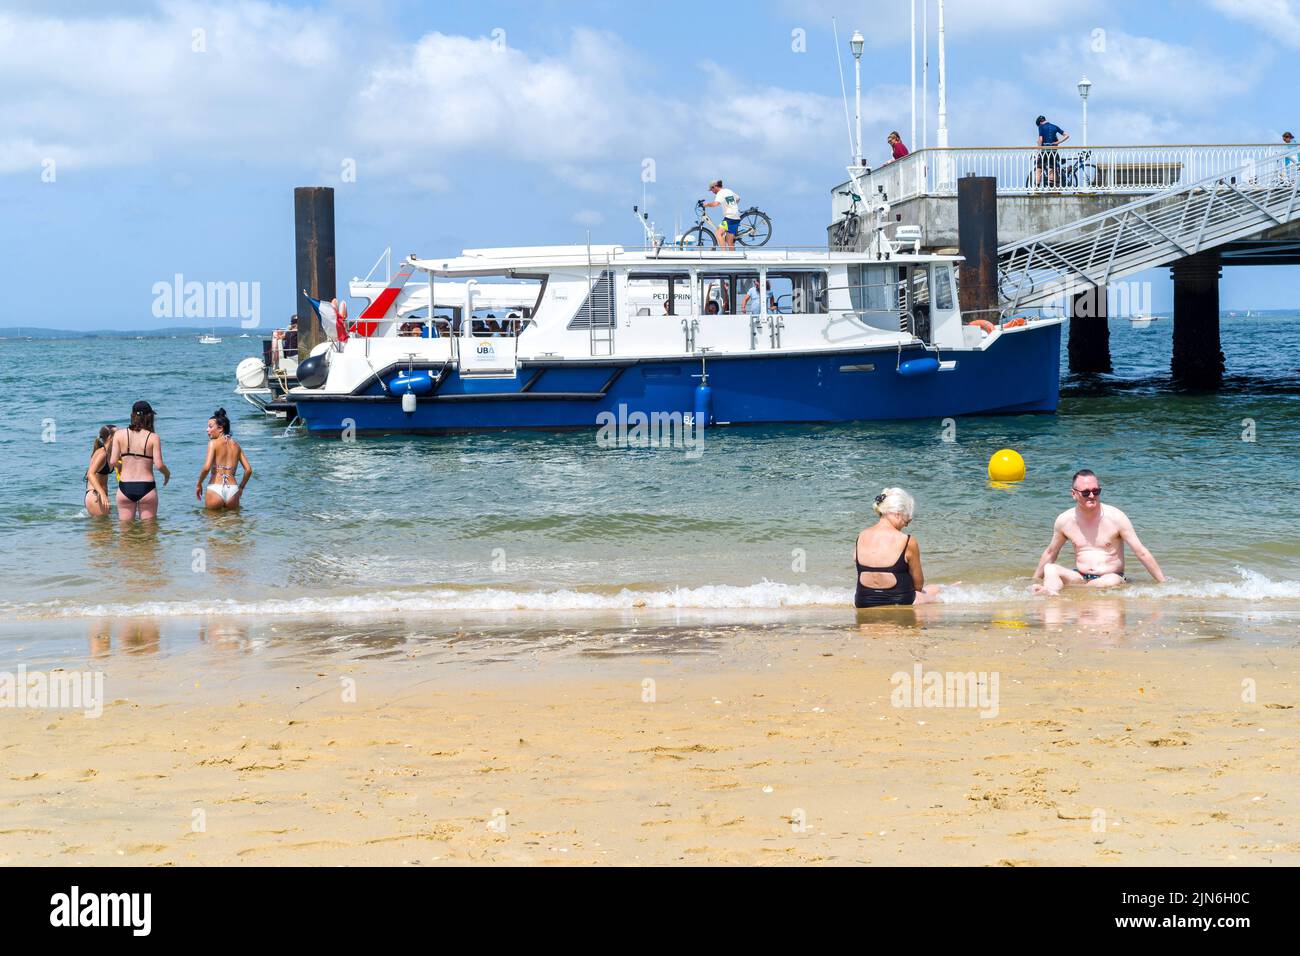 People bathing in front of a cab boat. Arcachon beach, the Belisaire pier, the embarkations, the lovers, the bathers, a day at the beach. August 04, 2022. Photo by Patricia Huchot-Boissier/ABACAPRESS.COM Stock Photo